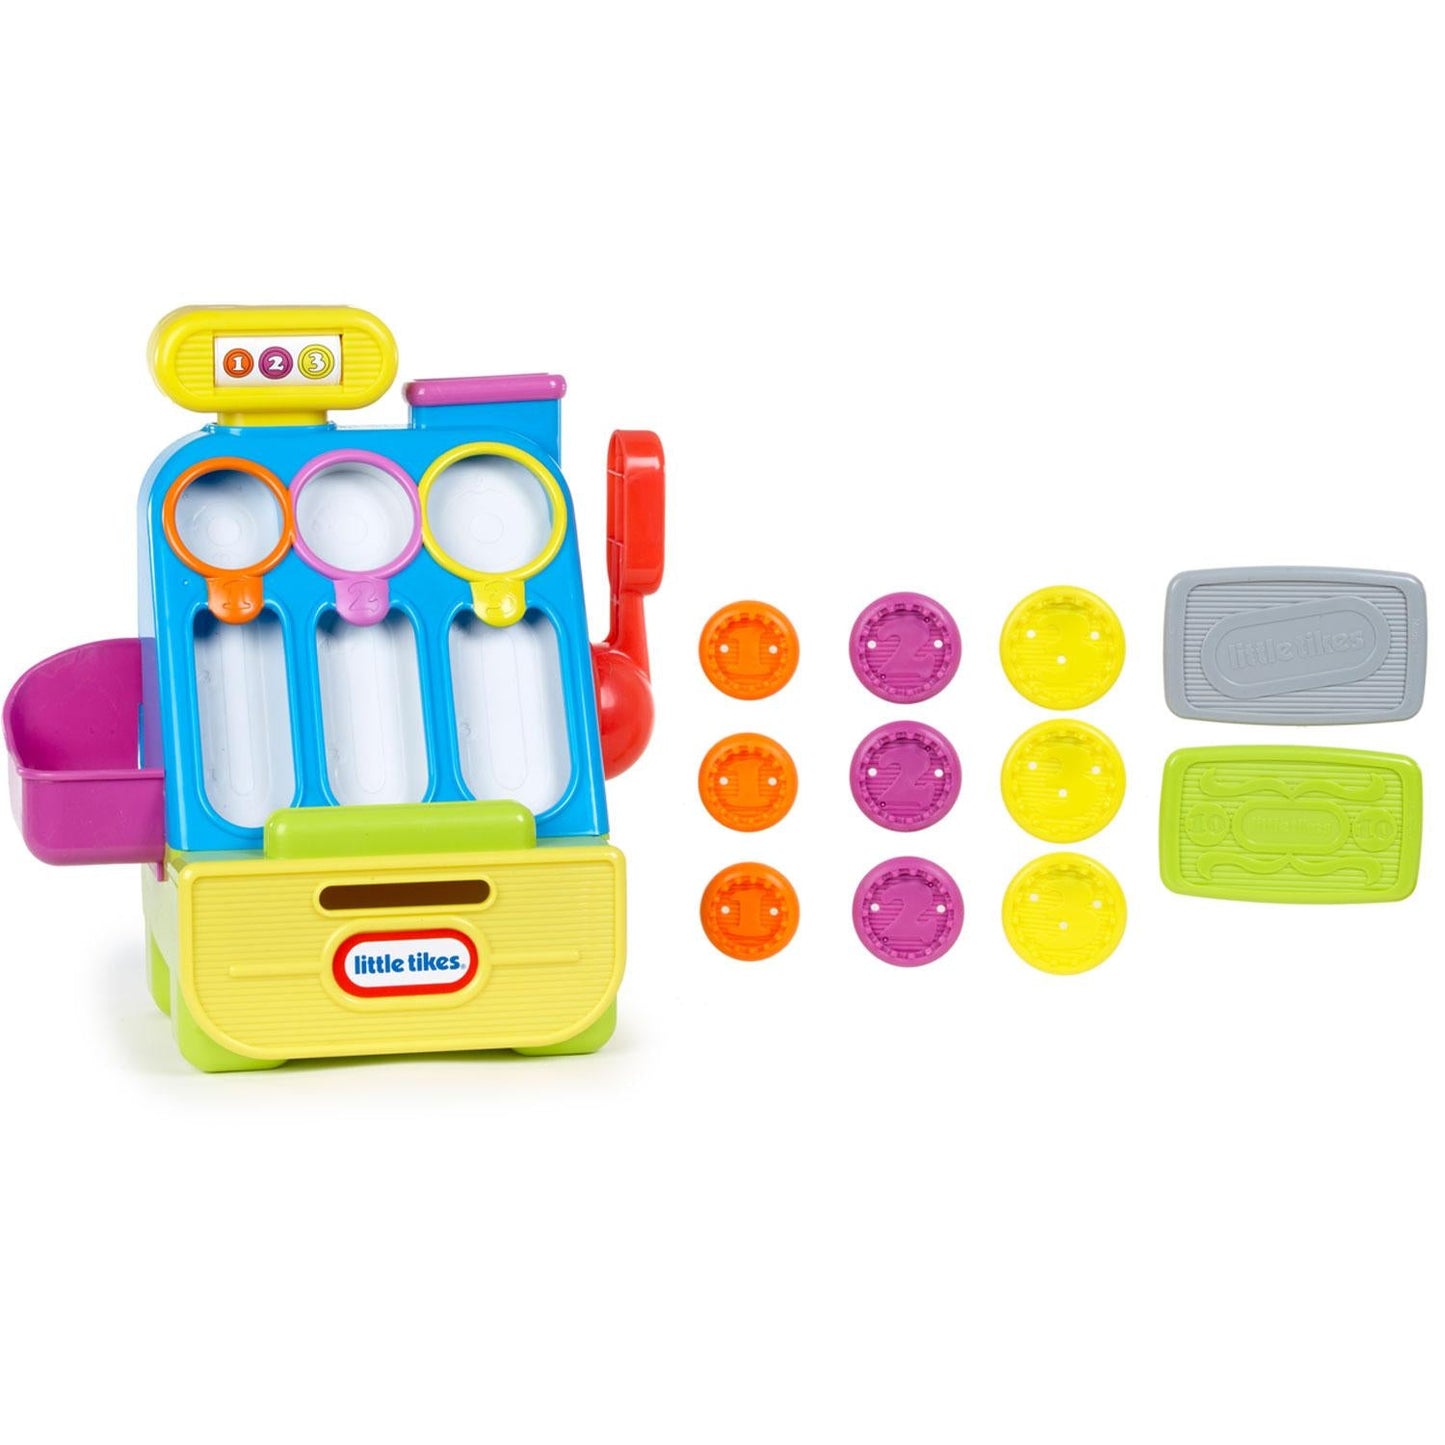 Little Tikes Count 'n Play Cash Register